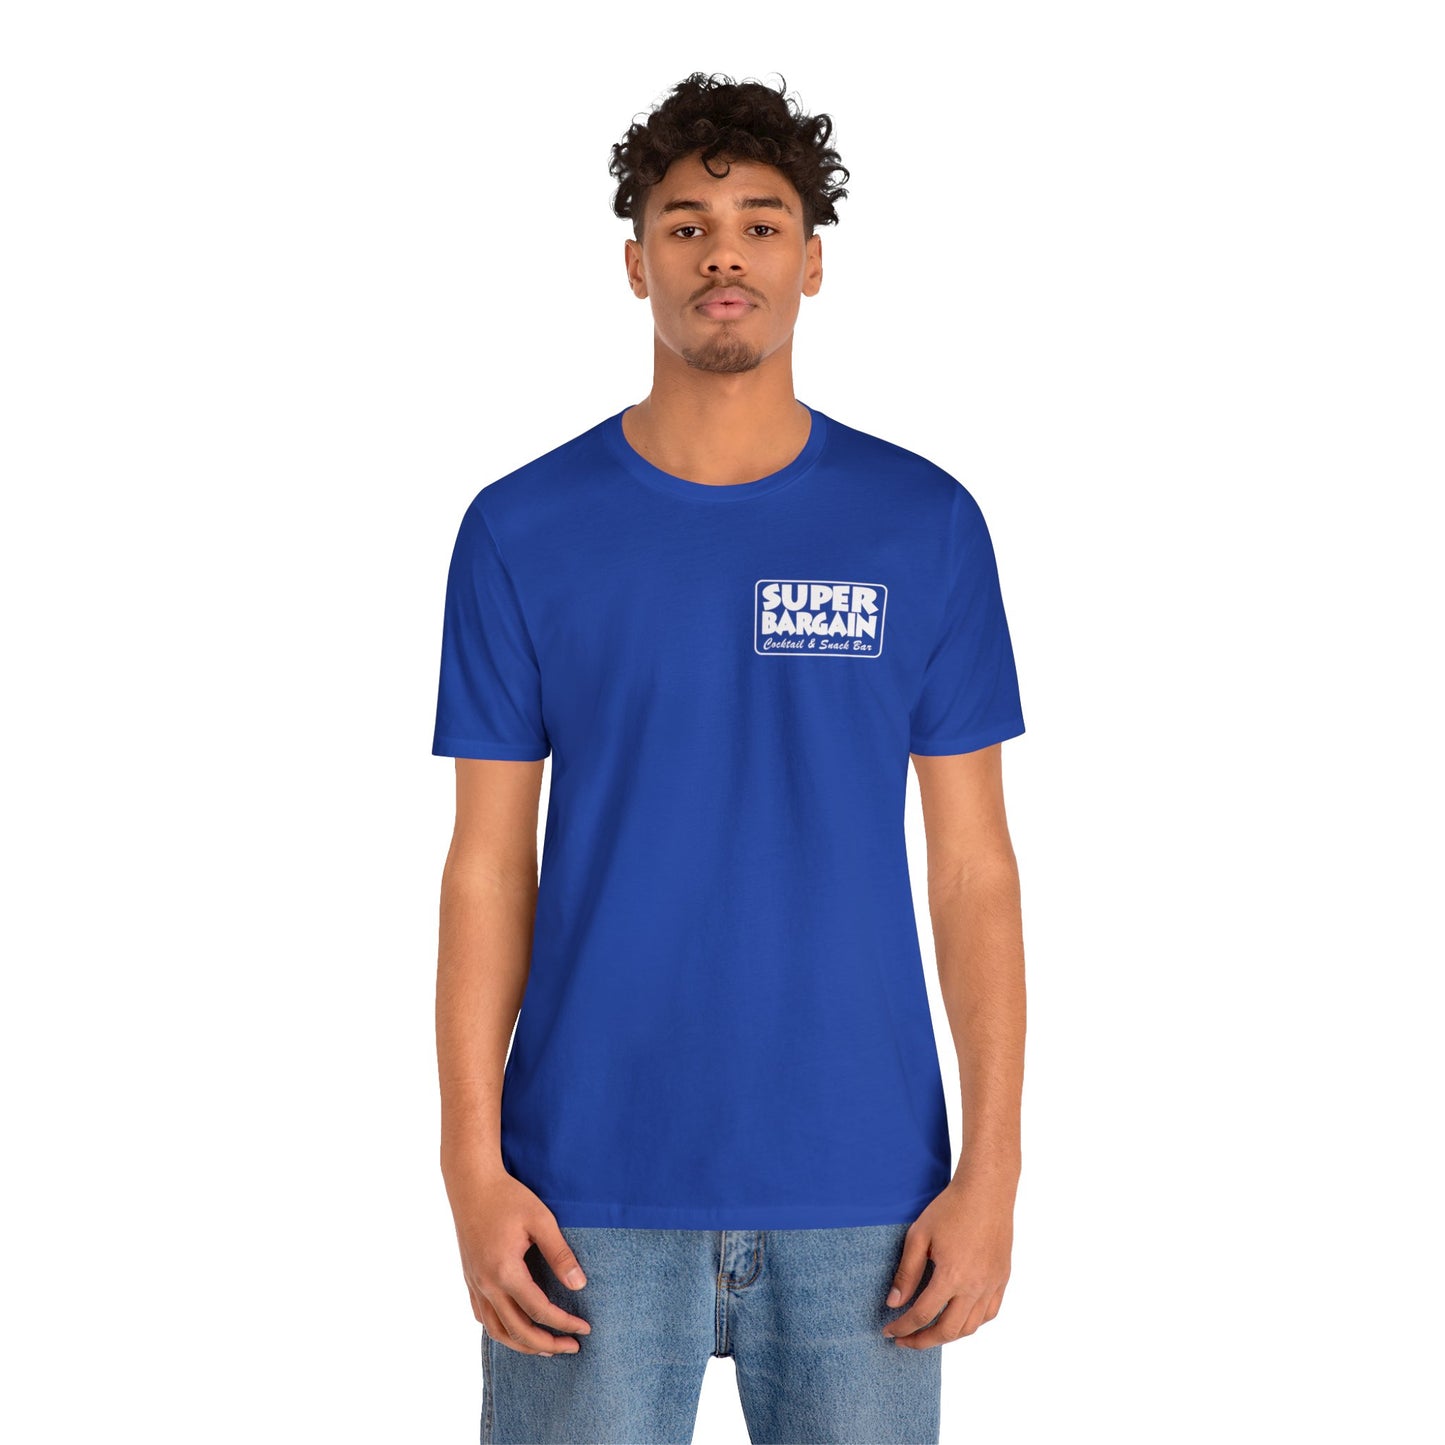 A young man in a bright blue t-shirt with the text "SUPER BARGAIN" printed on the chest, paired with light blue jeans, standing against a white background in Cabbagetown, Toronto. The t-shirt is a Printify Unisex Jersey Short Sleeve Monochrome Logo Tee.